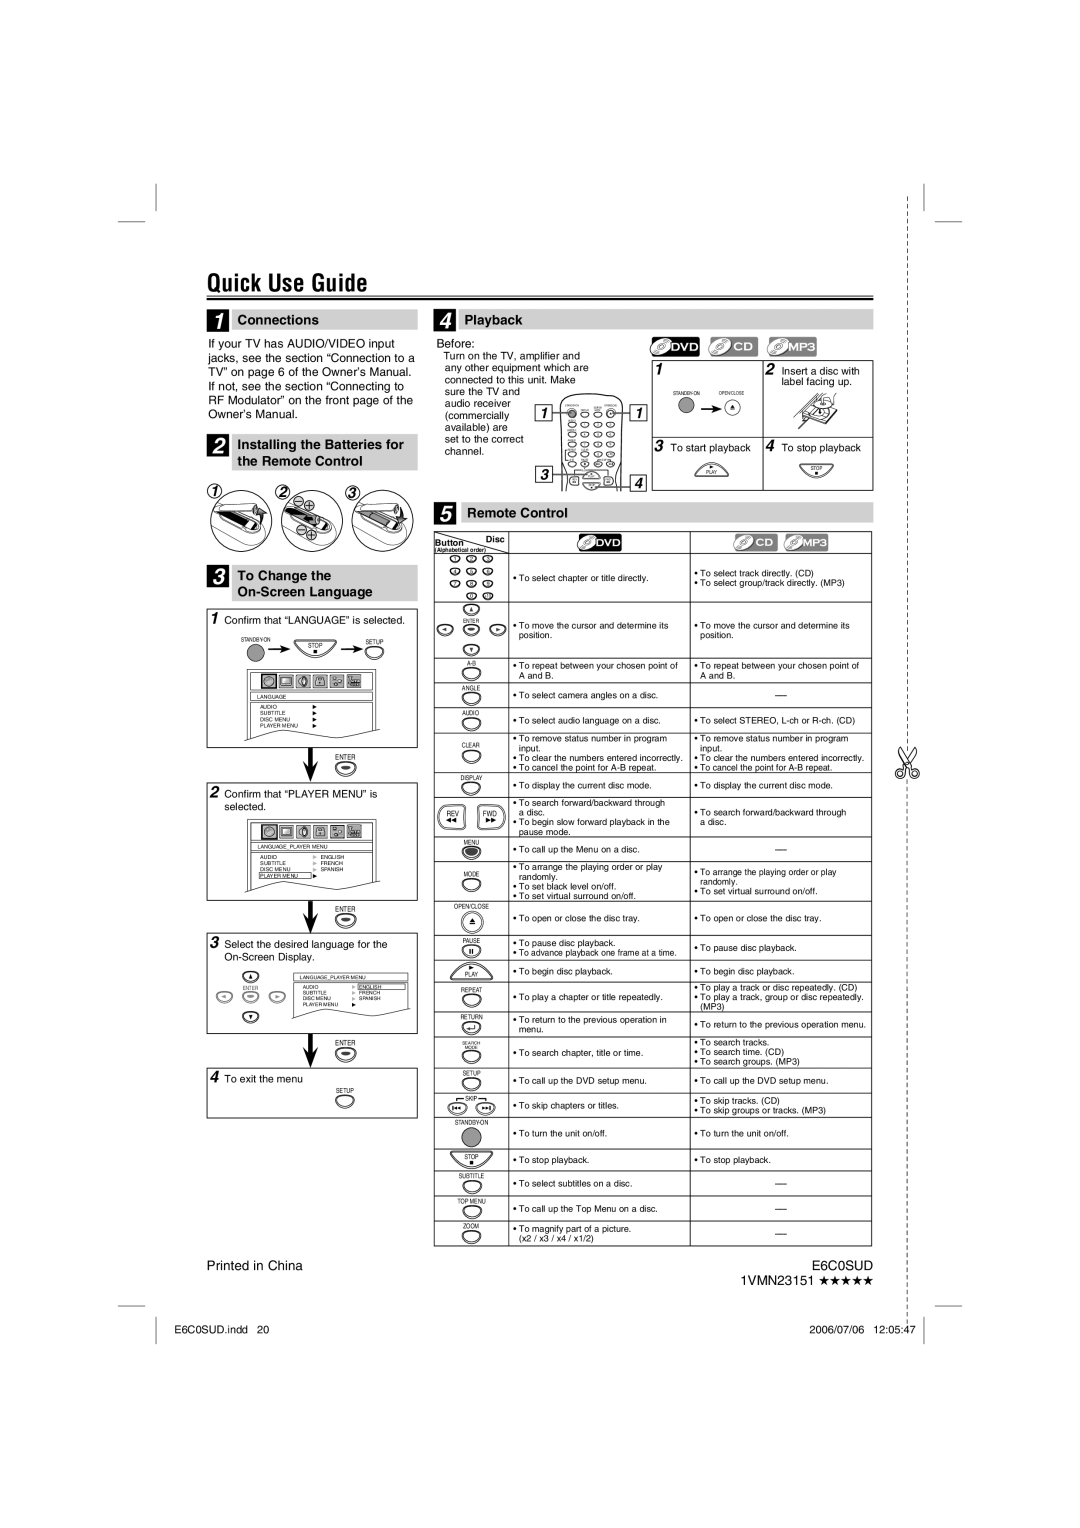 Magnavox MWD200GA owner manual Quick Use Guide, To Change the On-Screen Language, 1VMN23151, Before 